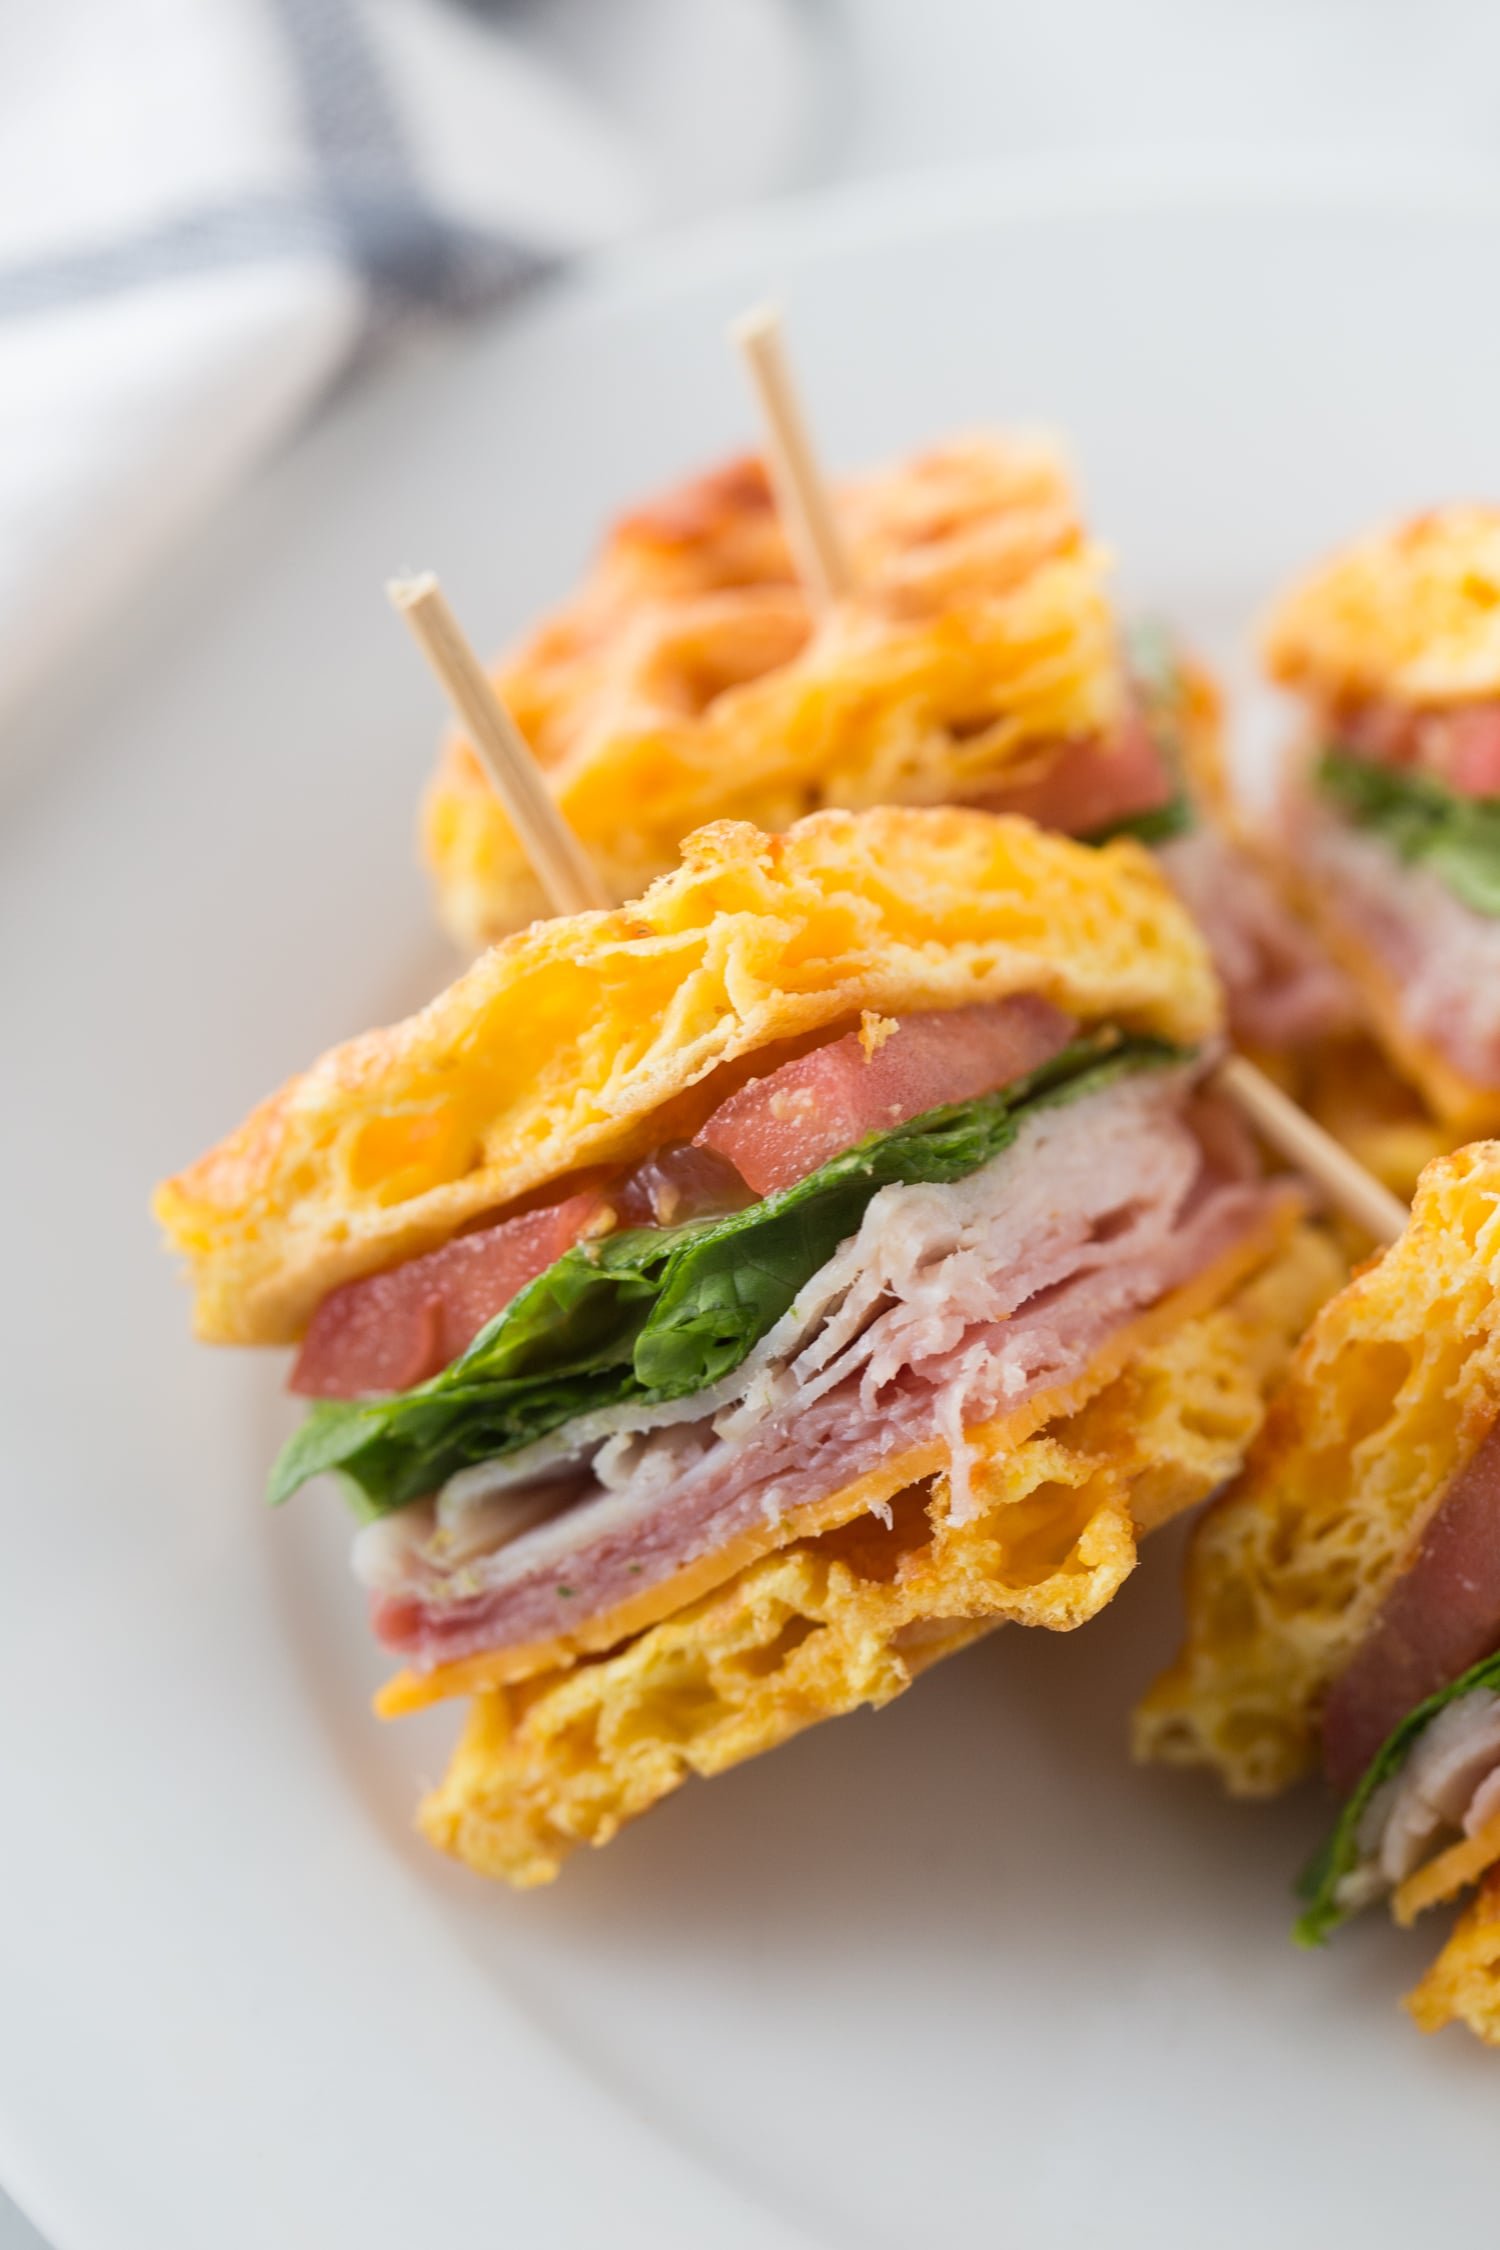 Close-up photo of a quarter of a chaffle club sandwich on a white plate, featuring a chaffle bun filled with turkey, ham, tomato, lettuce, and toothpicks holding it together and the other quarters in the background, 